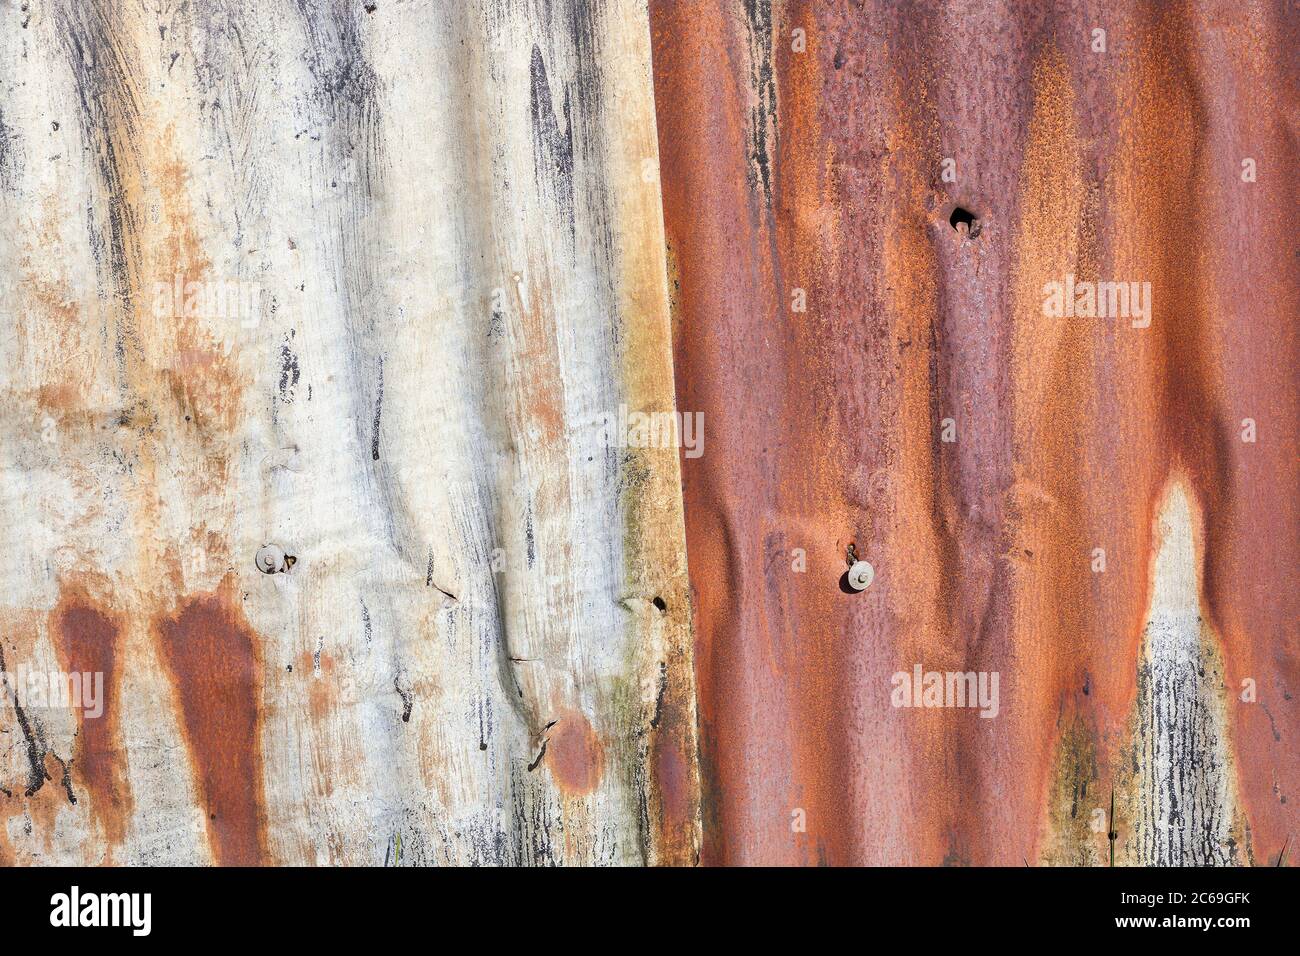 Distressed old corrugated rust covered iron fence texture background Stock Photo